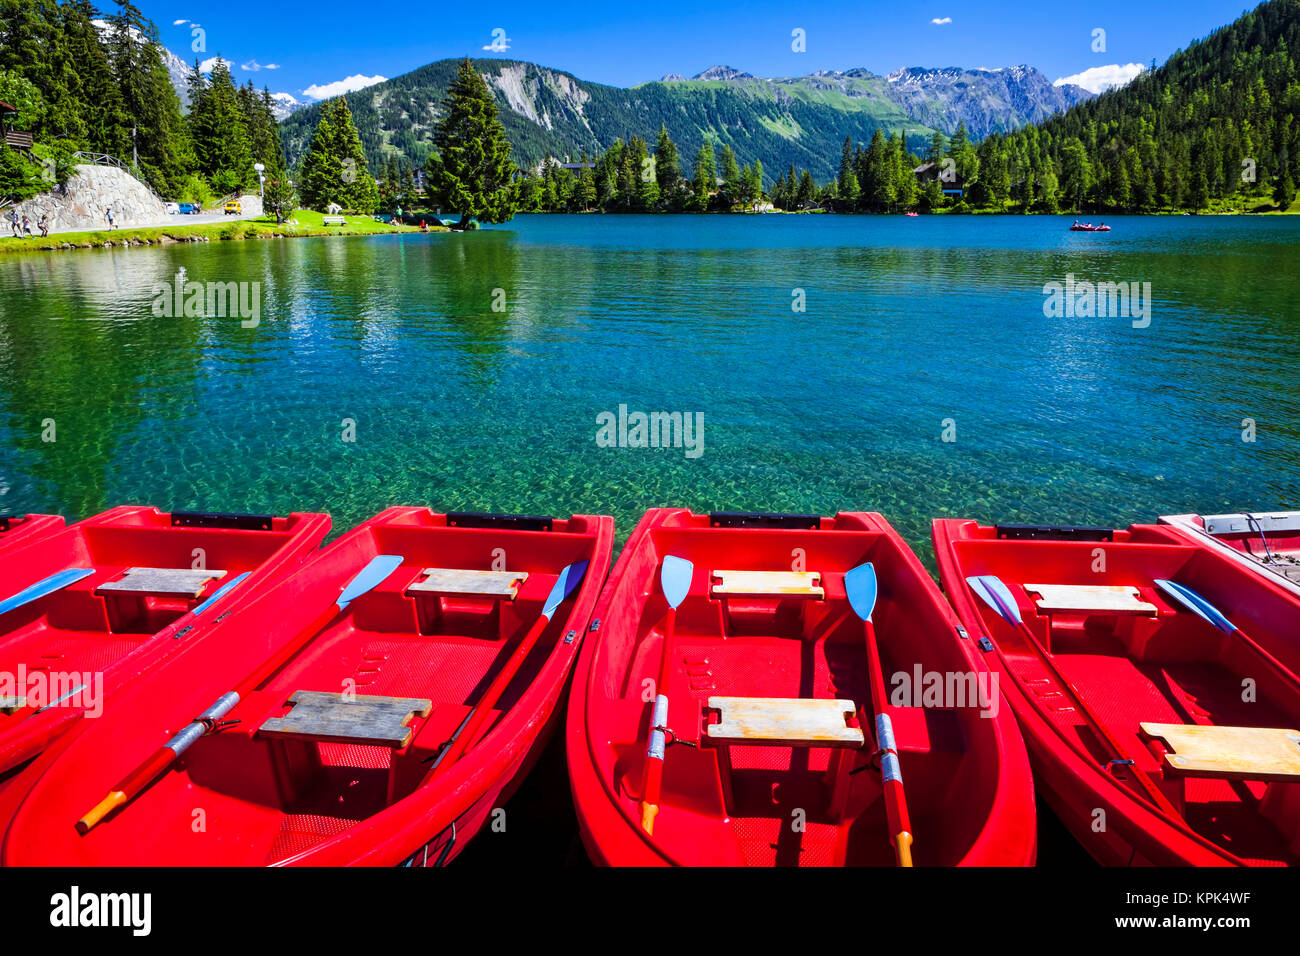 Red boats lined up at Champex Lake under blue sky with a mountain range in the background; Champex, Valais, Switzerland Stock Photo